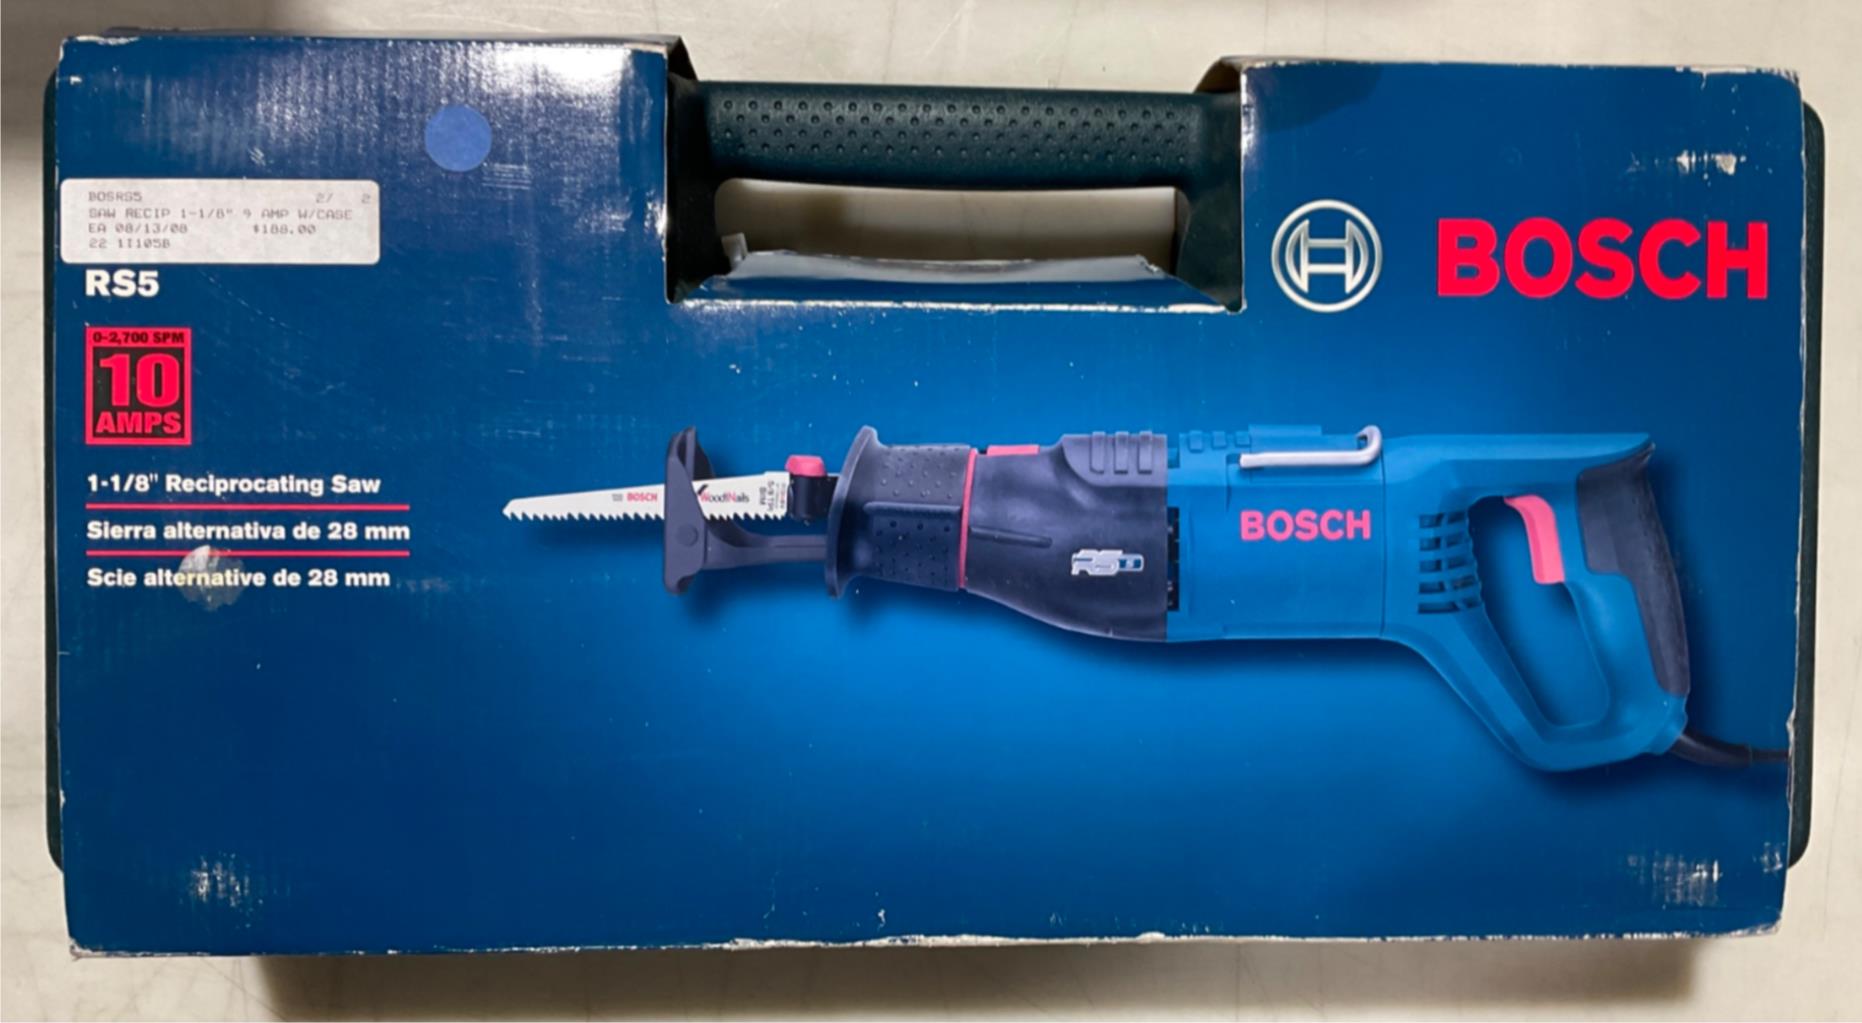 Bosch RS5 10 Amp Reciprocating Saw #13